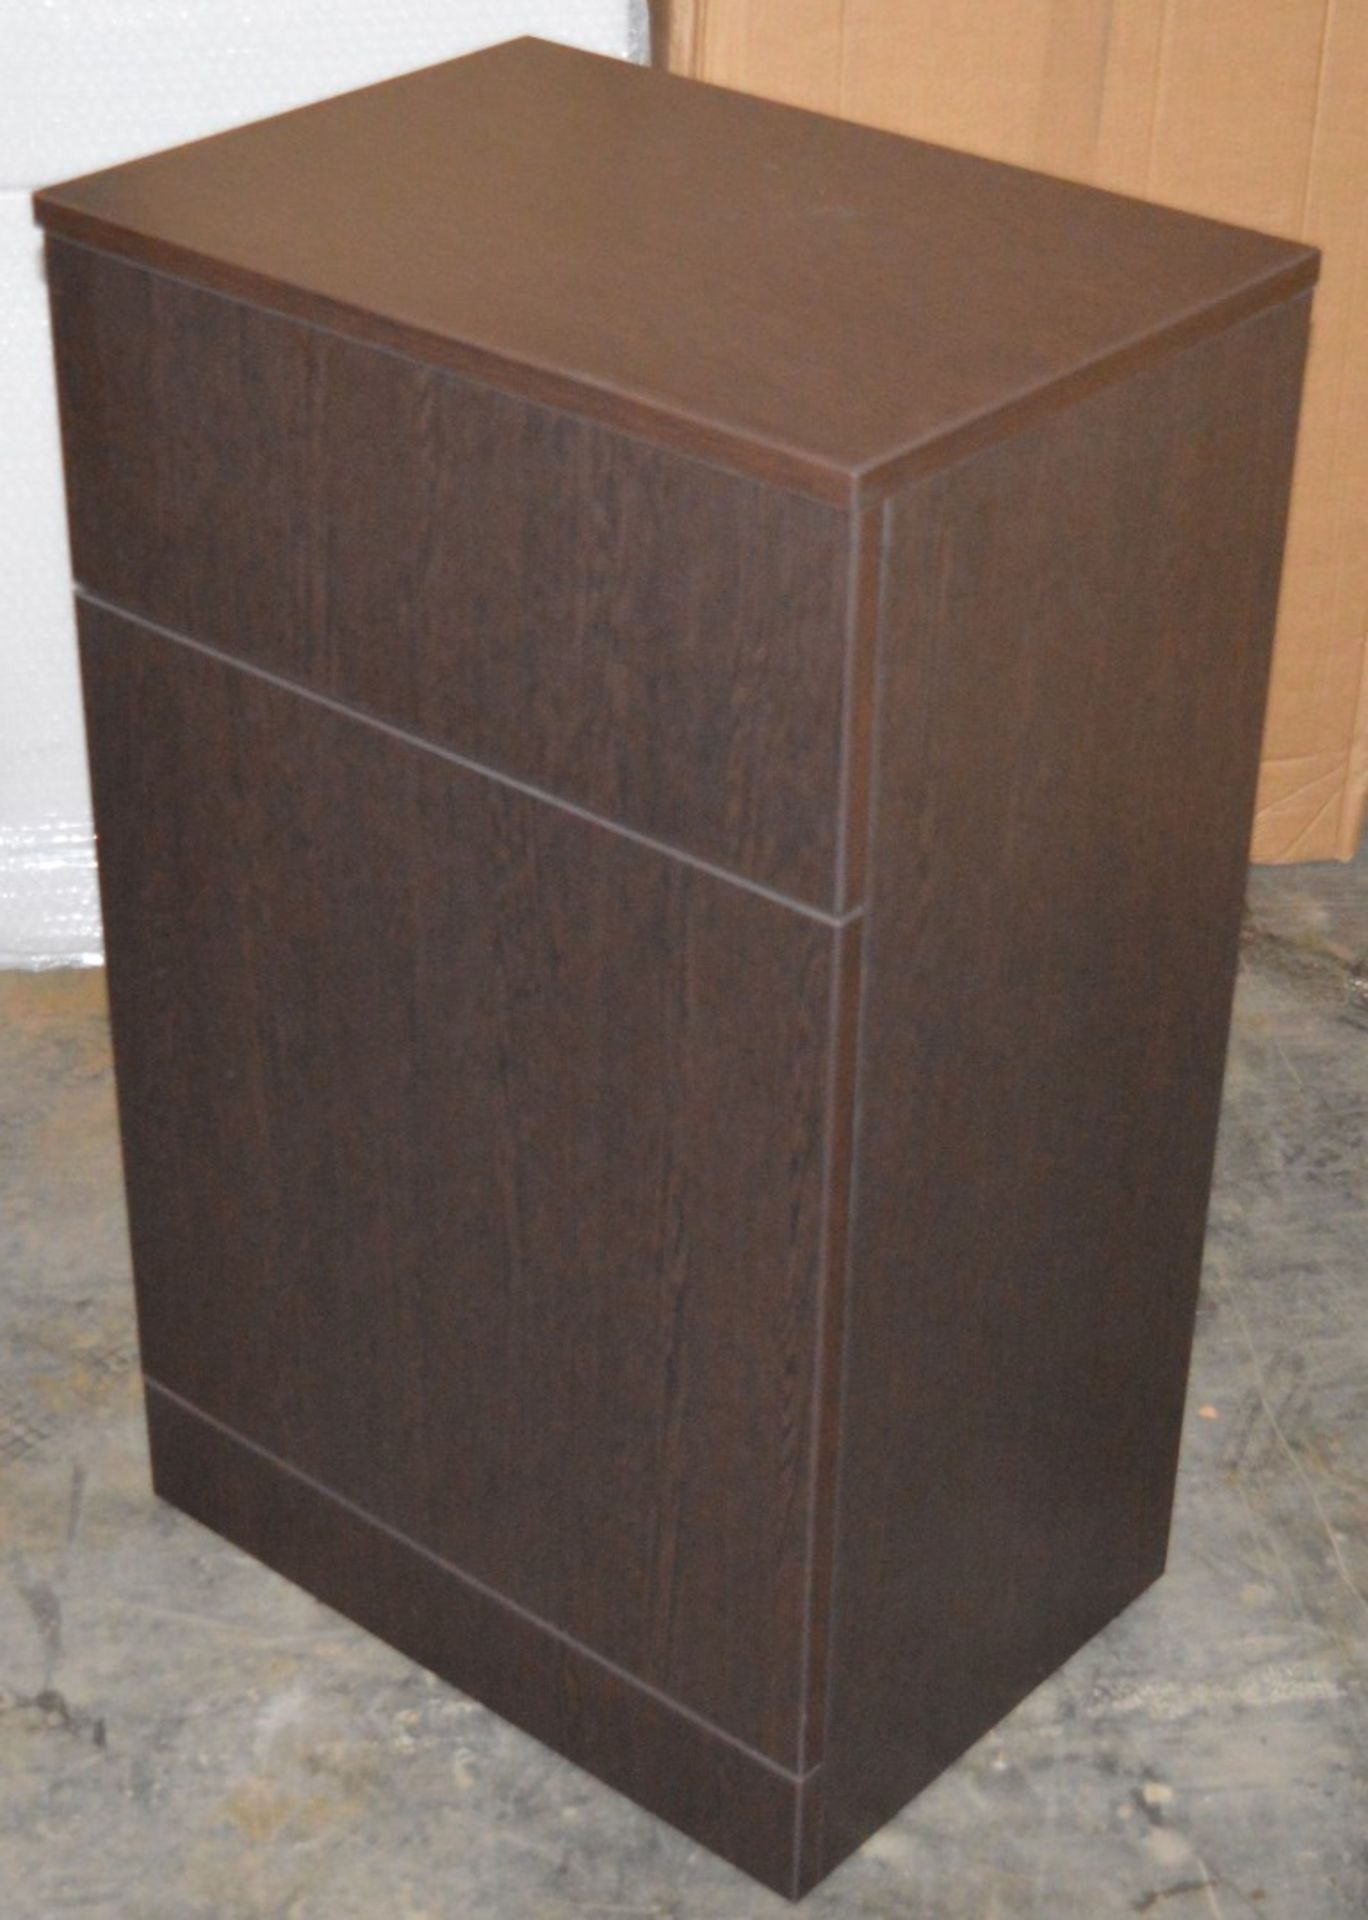 10 x Venizia BTW Toilet Pan Units in Wenge With Concealed Cisterns - 500mm Width - Includes Push - Image 2 of 4